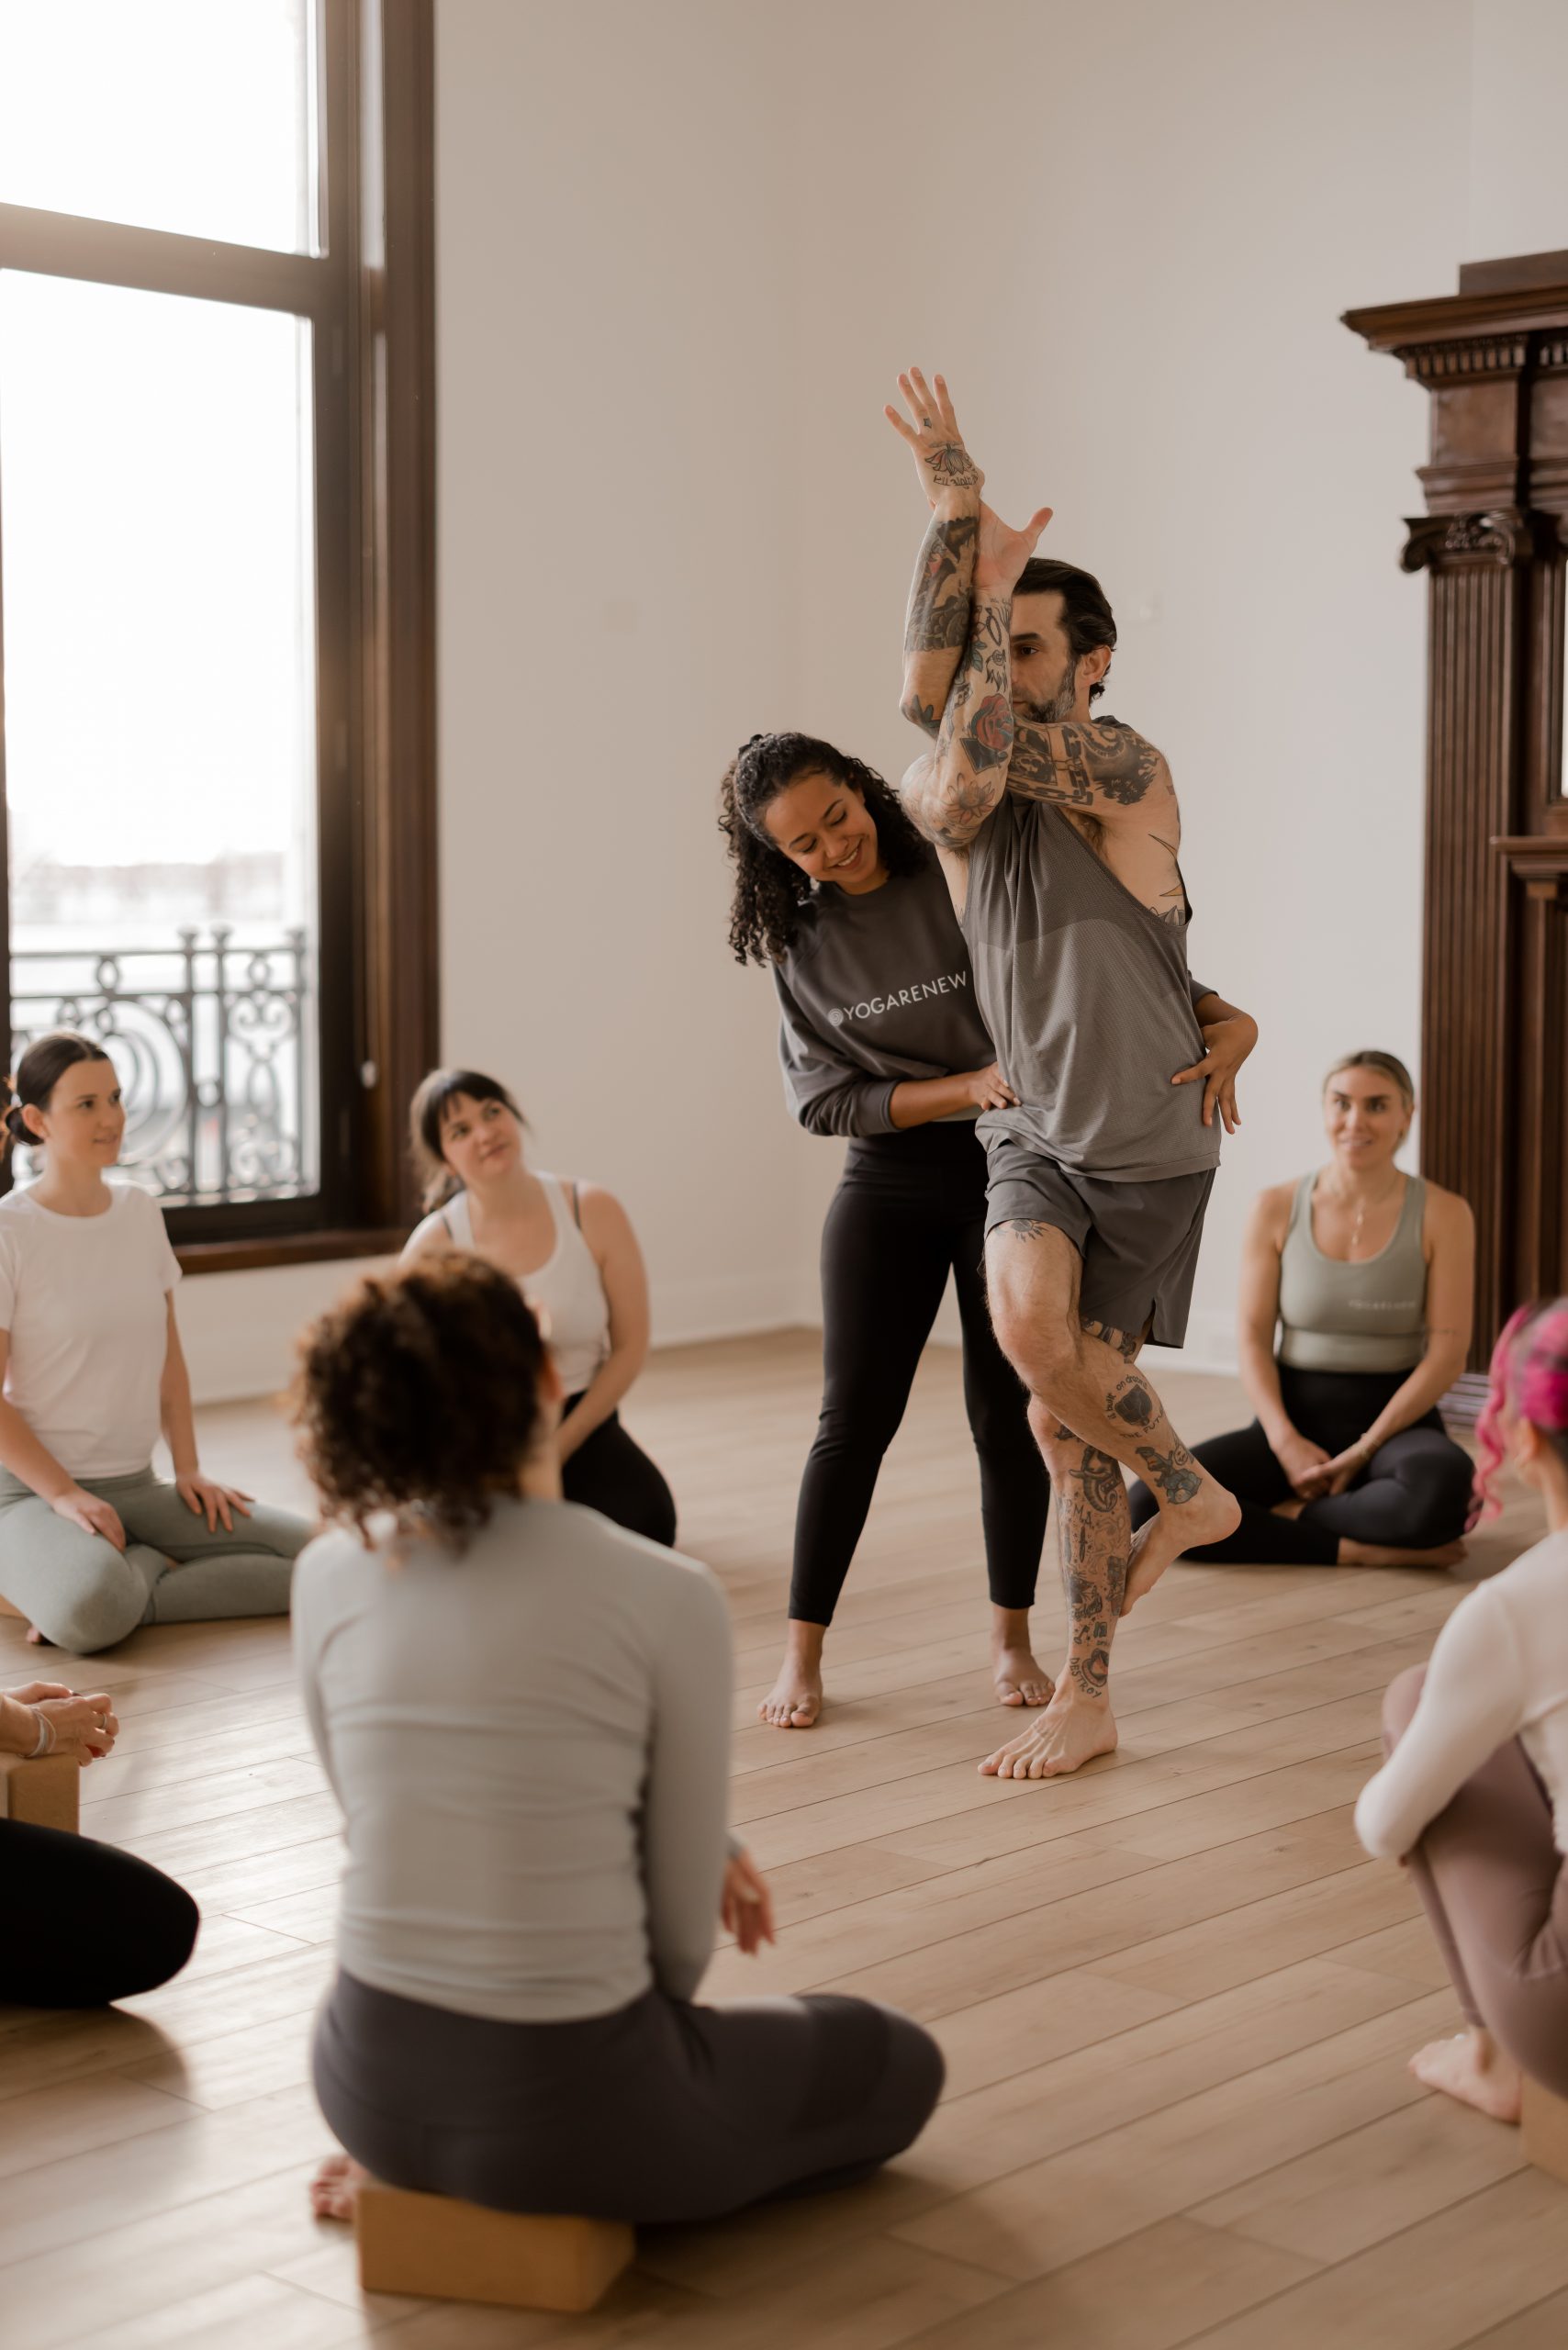 A dark-haired, young female yoga student giving a hands-on assist to the senior yoga teacher, tattooed male, Ronen Kauffman